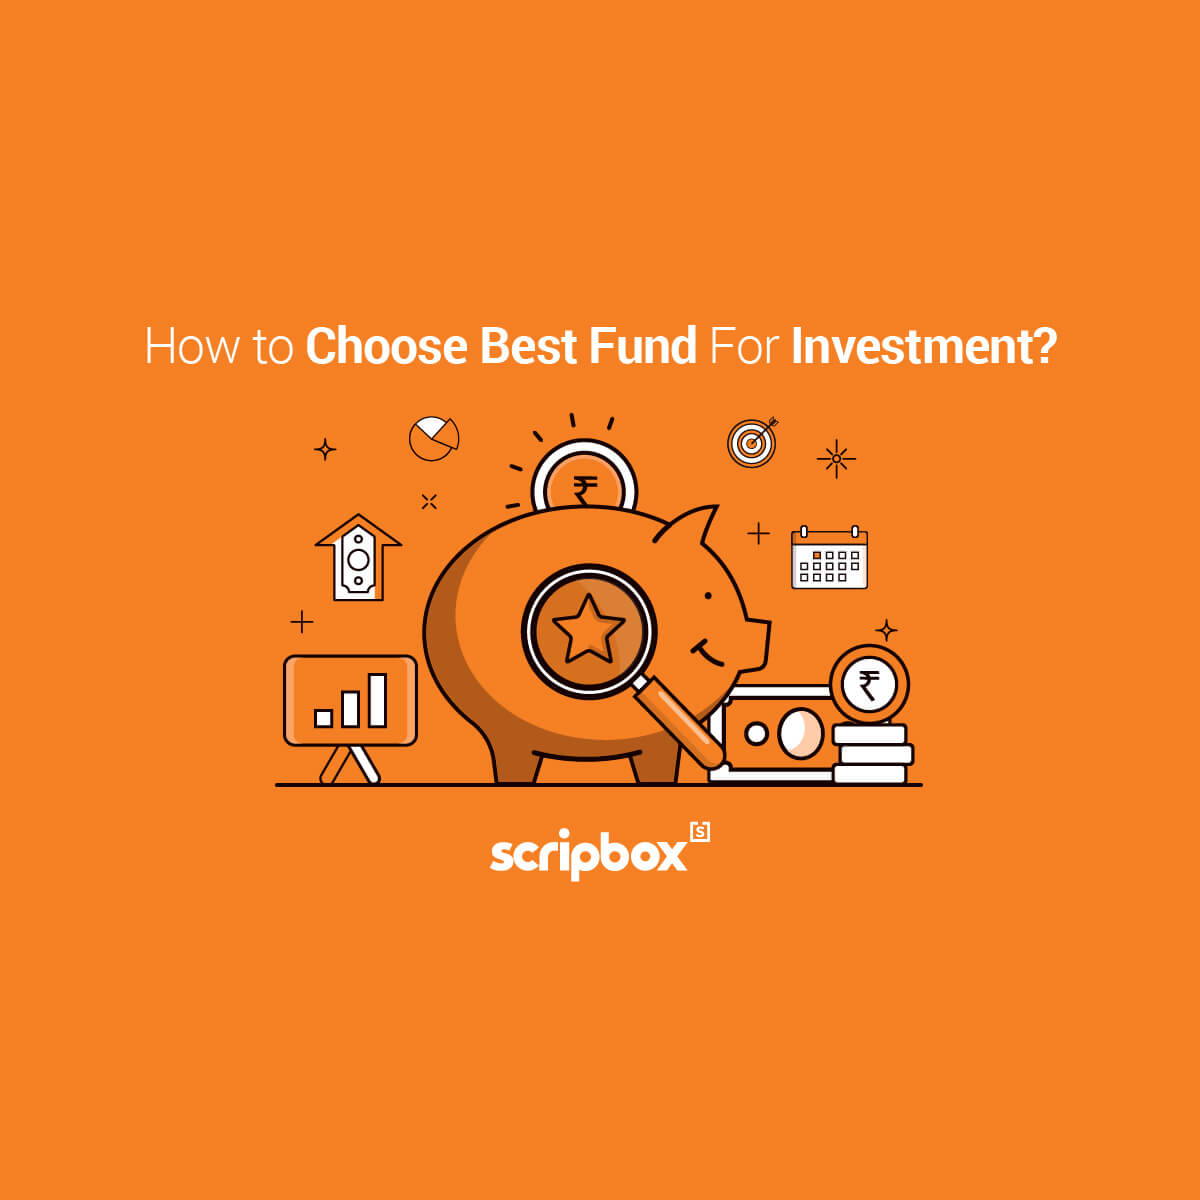 Should You Choose the Right Fund or Best Fund? What is Good